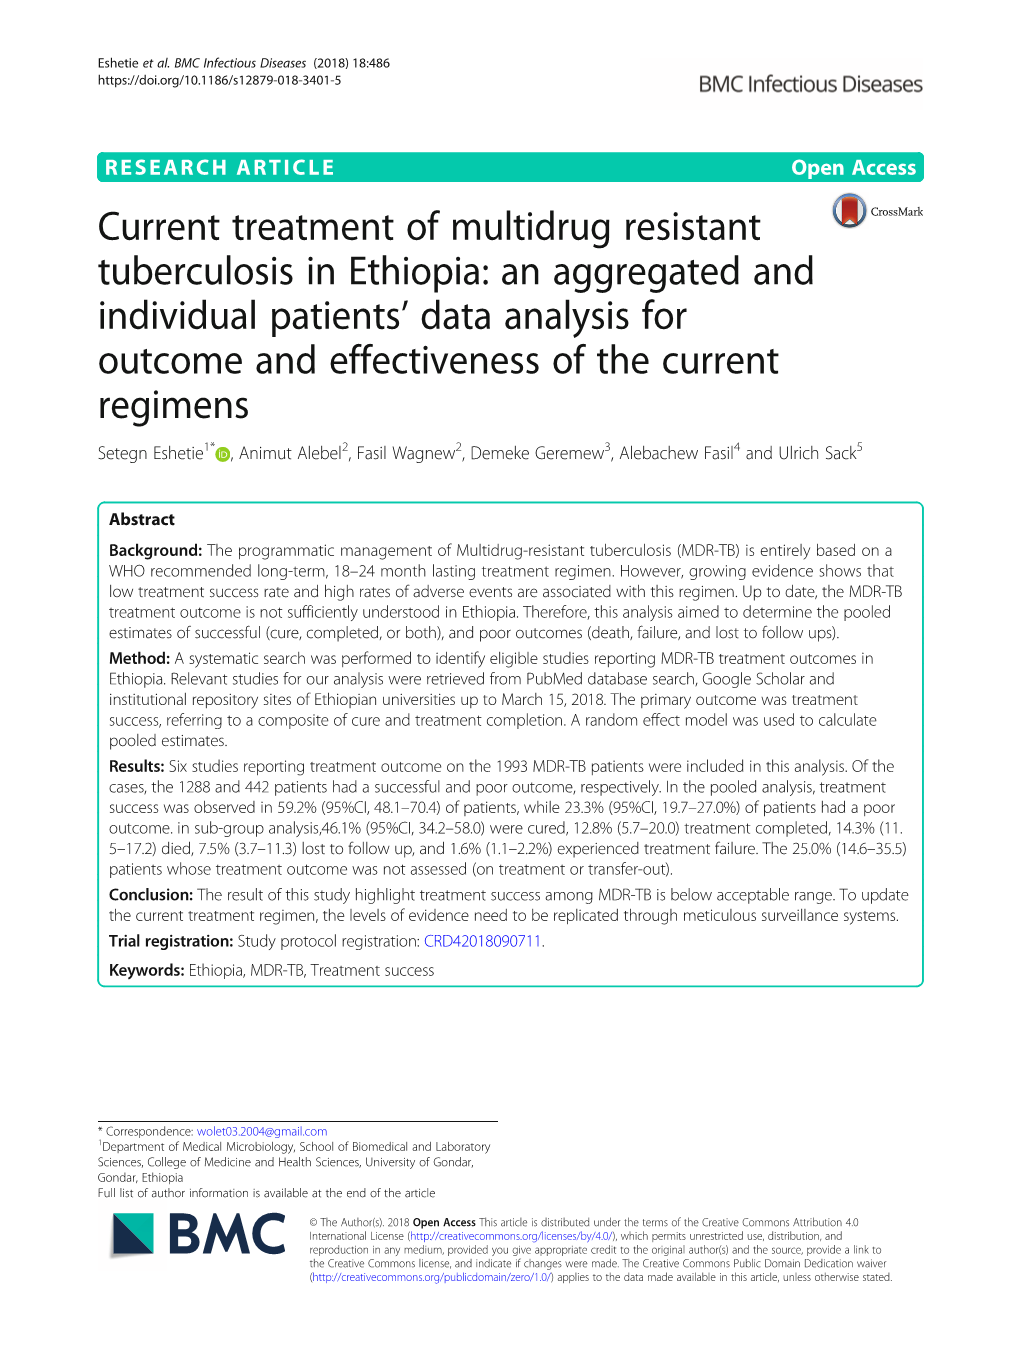 Current Treatment of Multidrug Resistant Tuberculosis in Ethiopia: an Aggregated and Individual Patients' Data Analysis for Ou